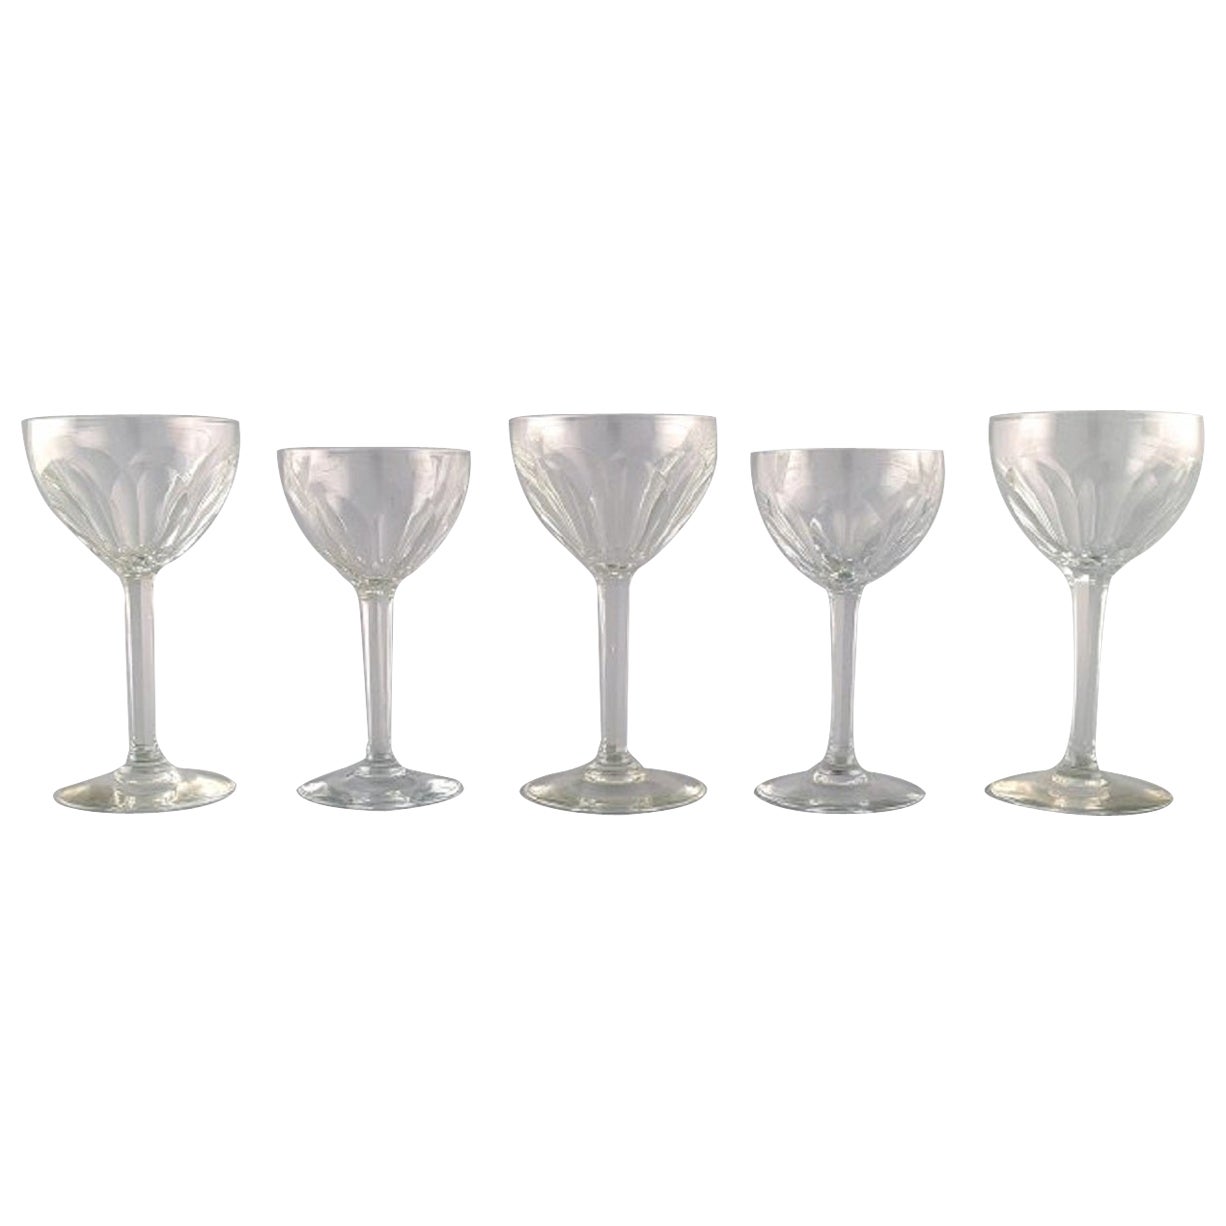 Baccarat, France, Five Art Deco Wine Glasses in Clear Crystal Glass